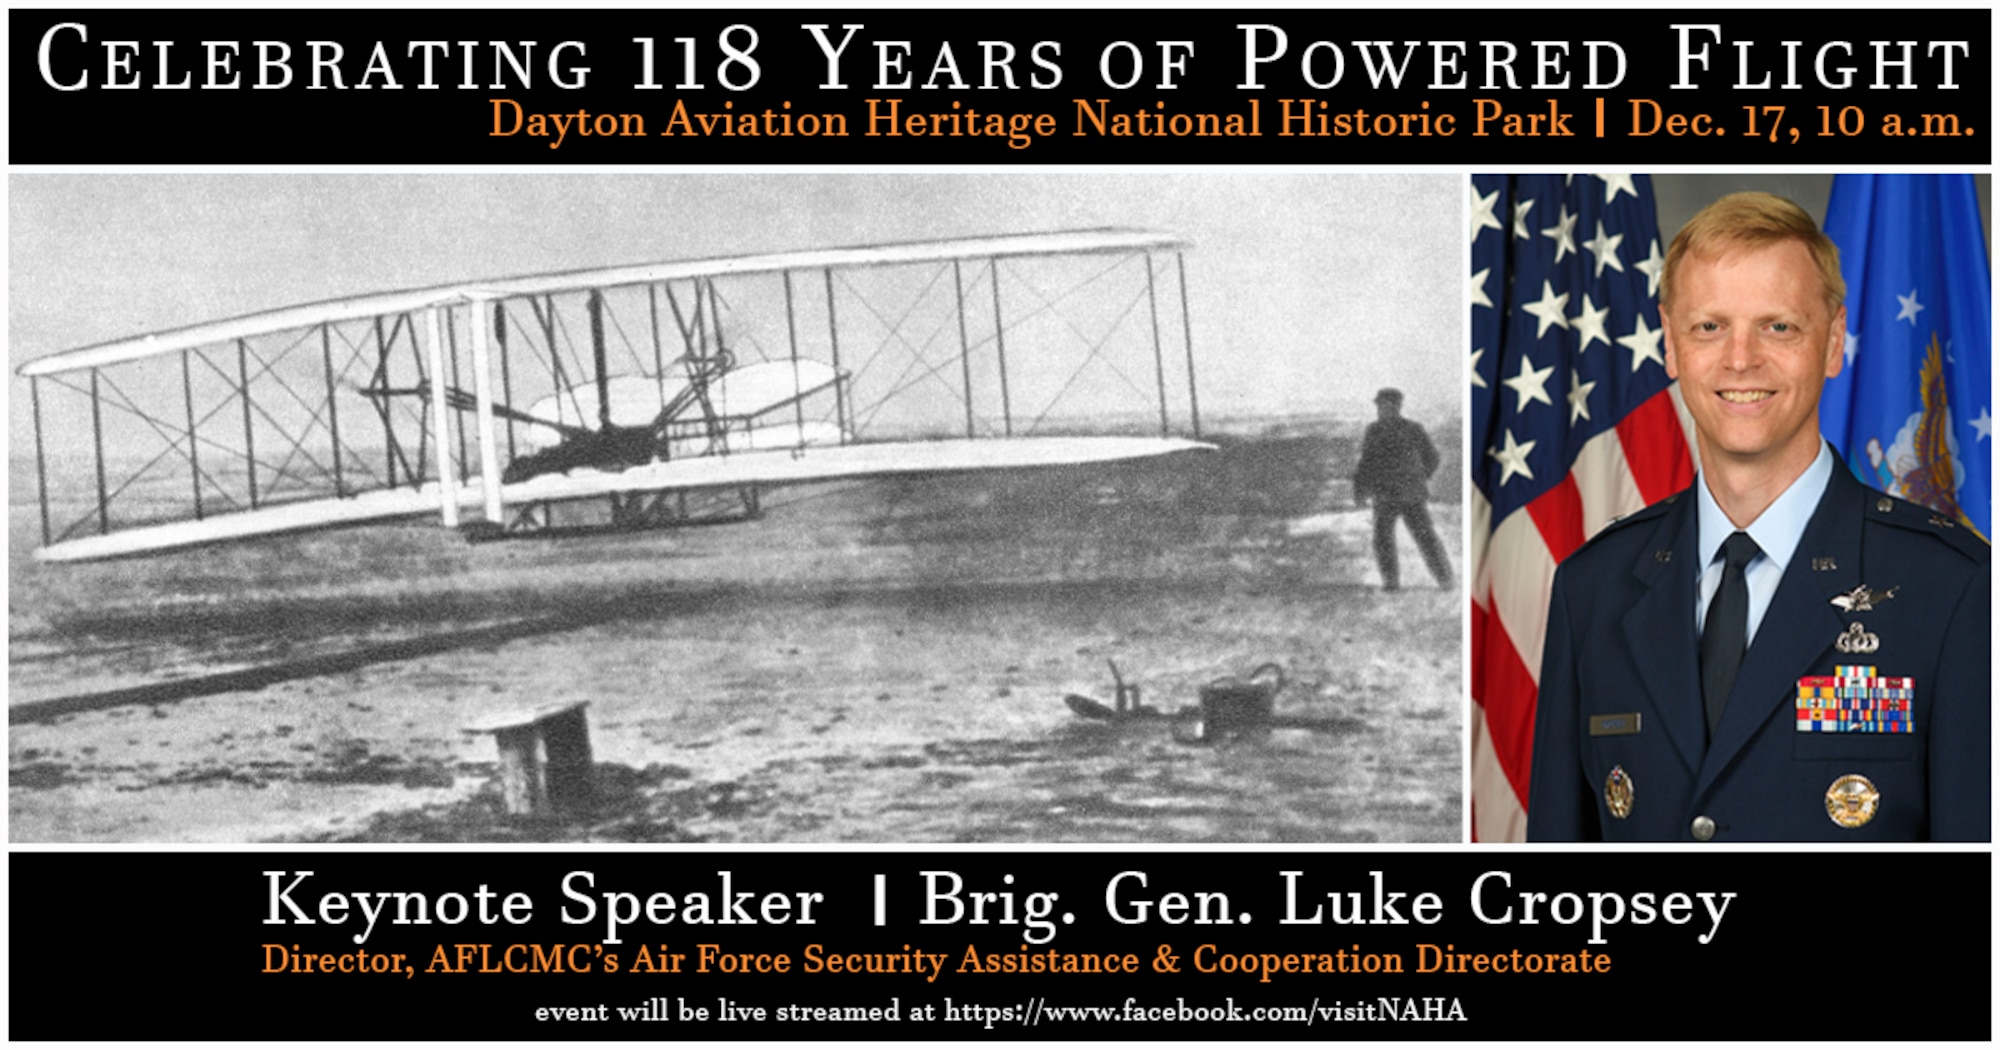 Wright-Patterson Air Force Base officials  will commemorate the 118th anniversary of achieving powered flight on Dec. 17, at 10 a.m. in Dayton . (U.S. Air Force graphic by Jim Varhegyi)